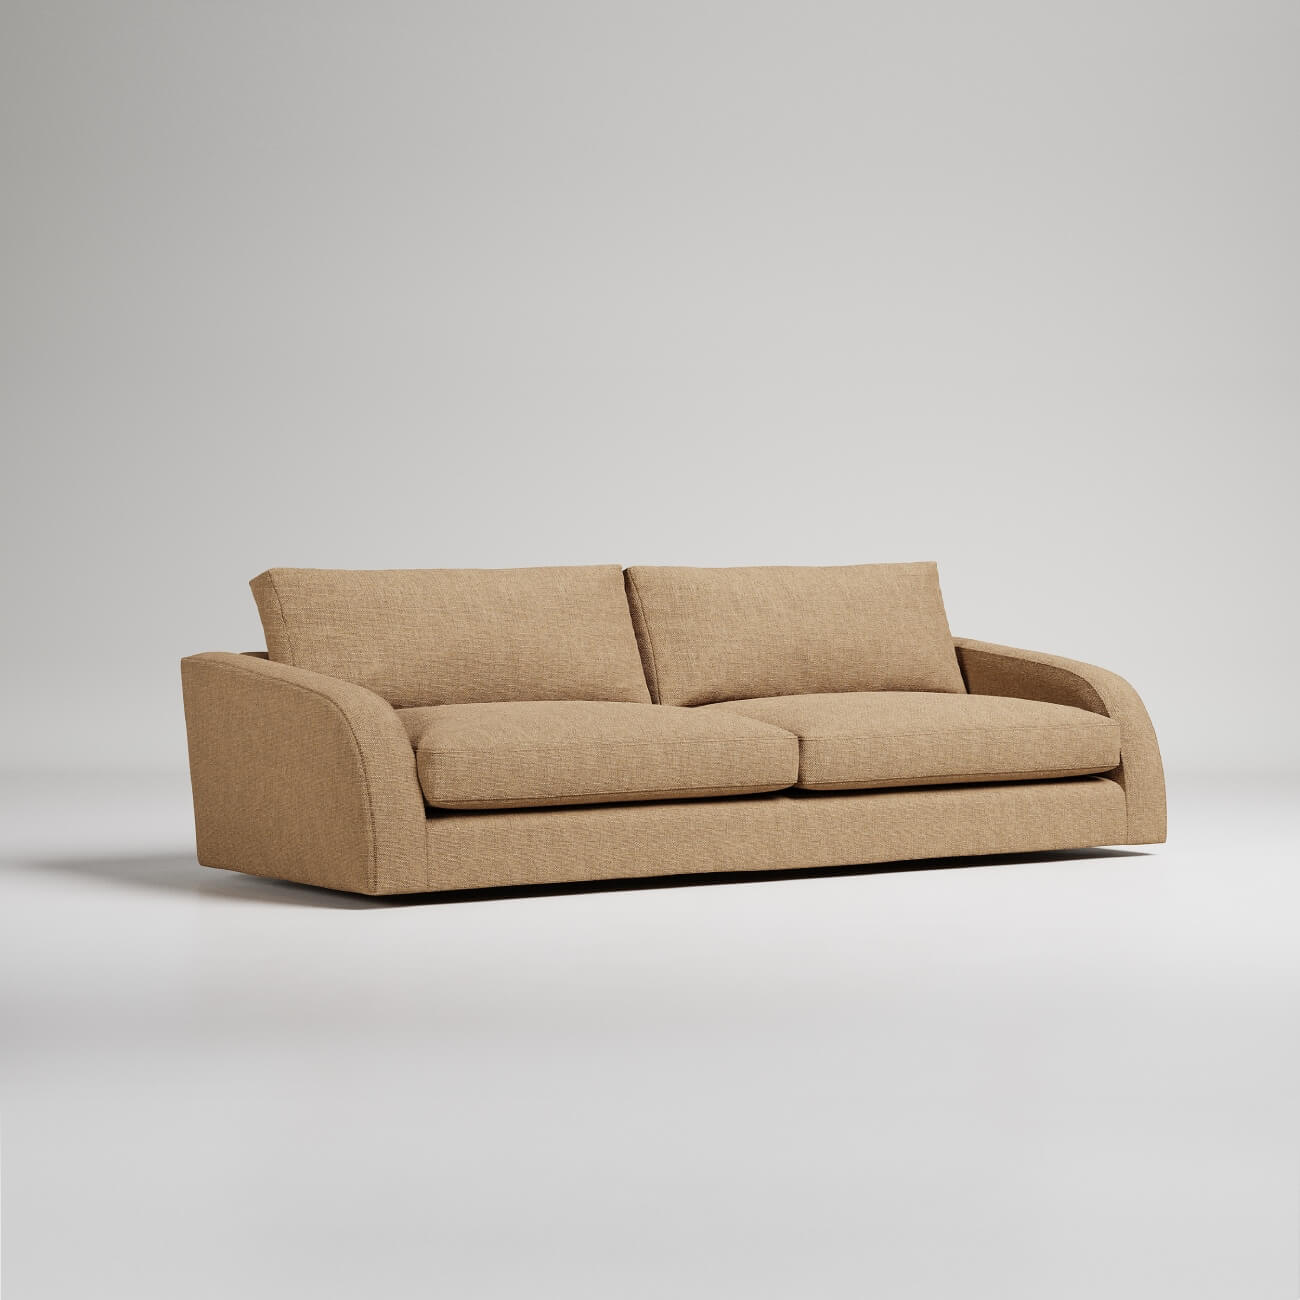 Large tan sofa with two seat cushions